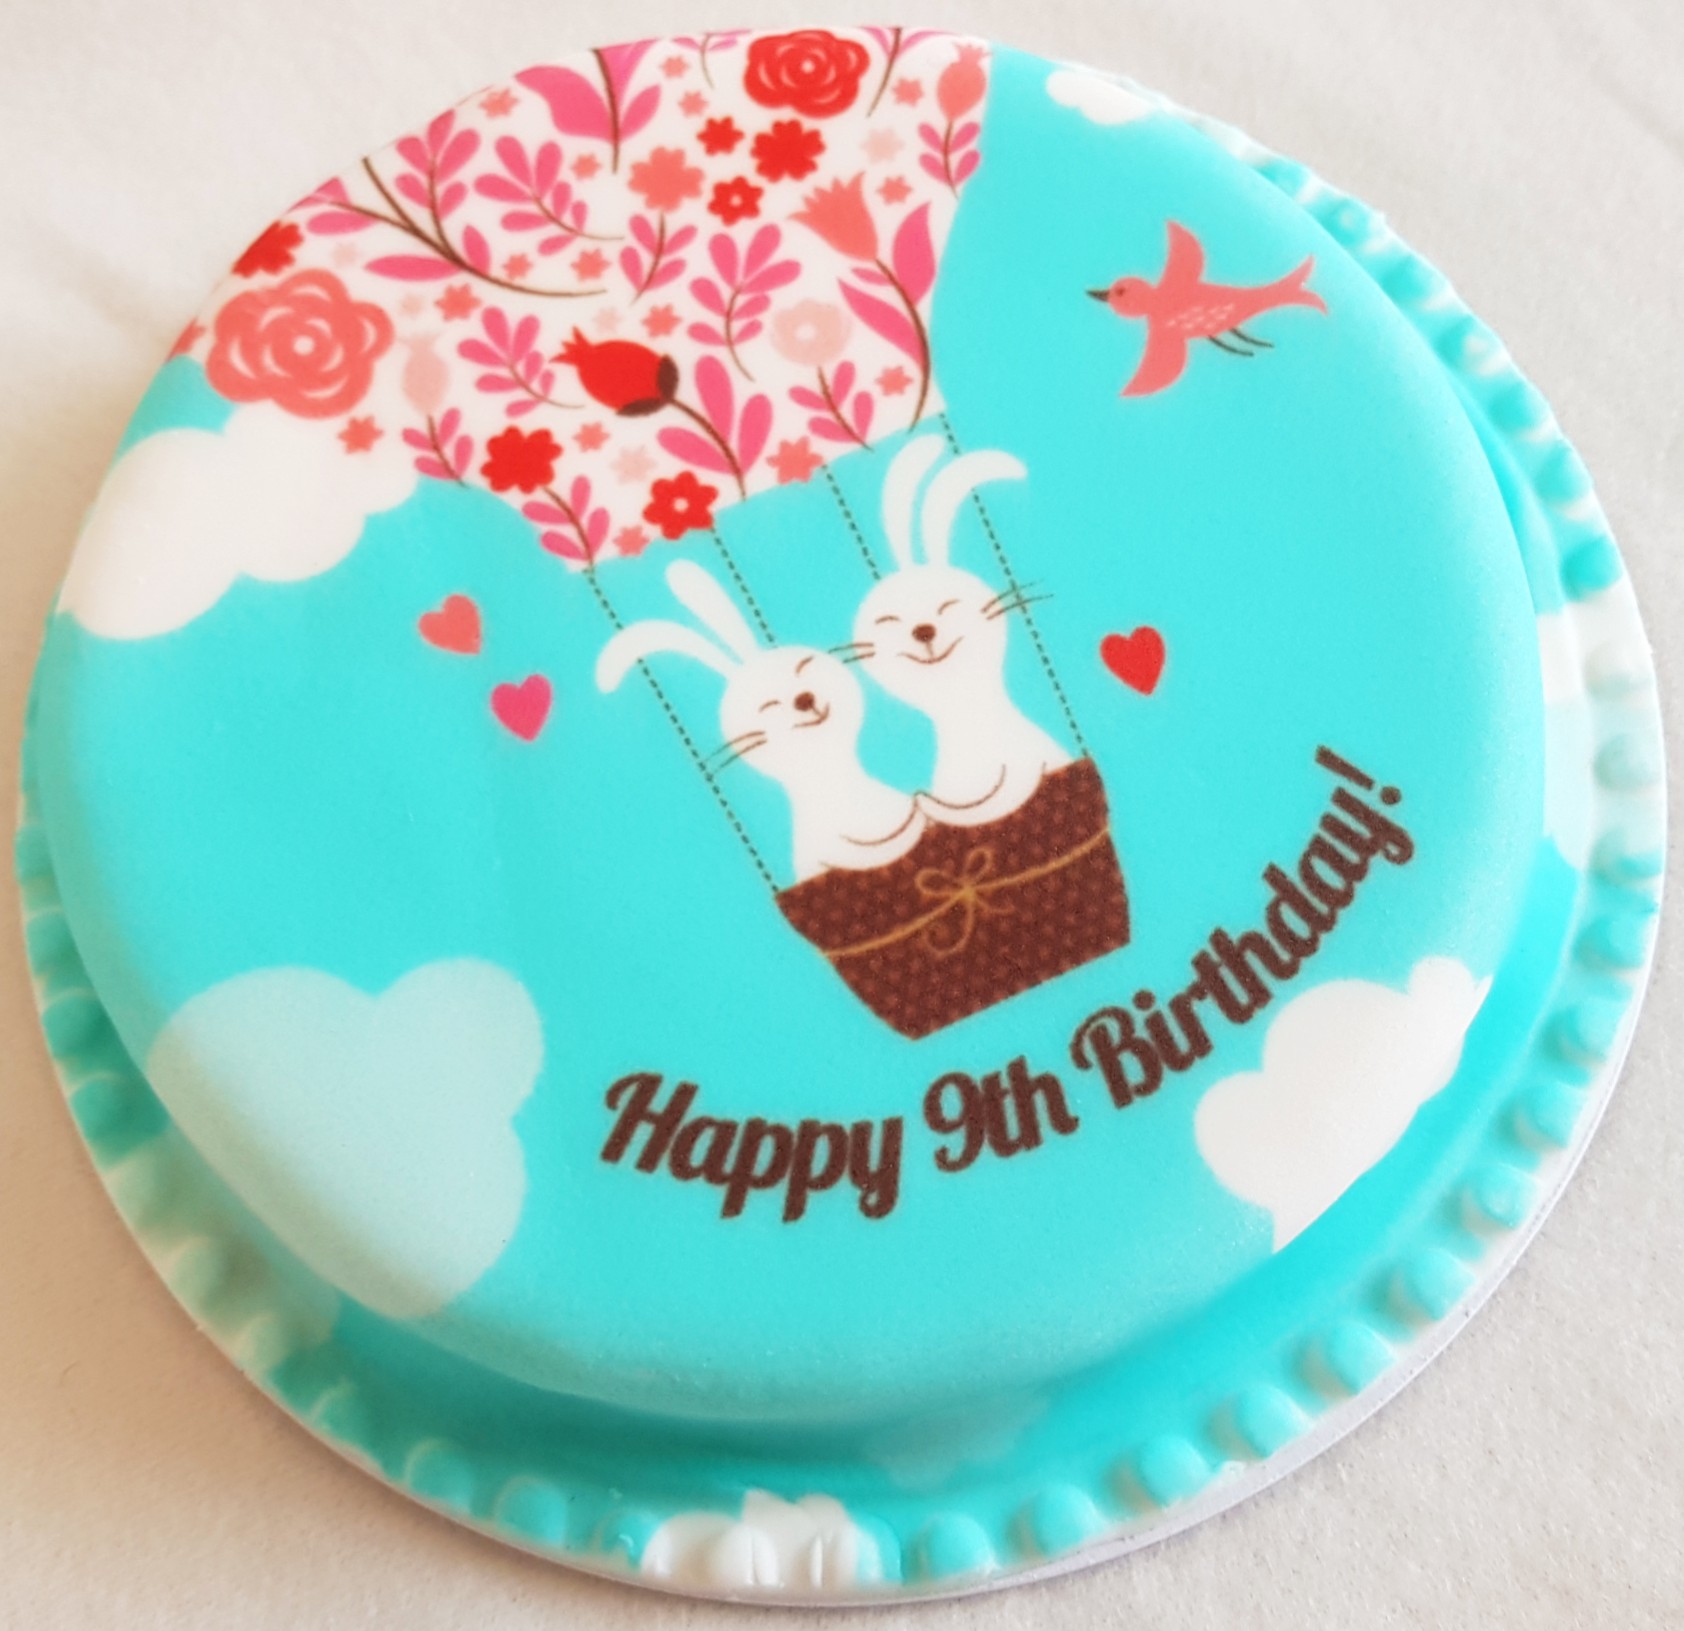 Bakerdays, letterbox cake, birthday cake, celebration, special occasion, cake, gift ideas, food, review, competition, giveaway, Living Life Our Way 